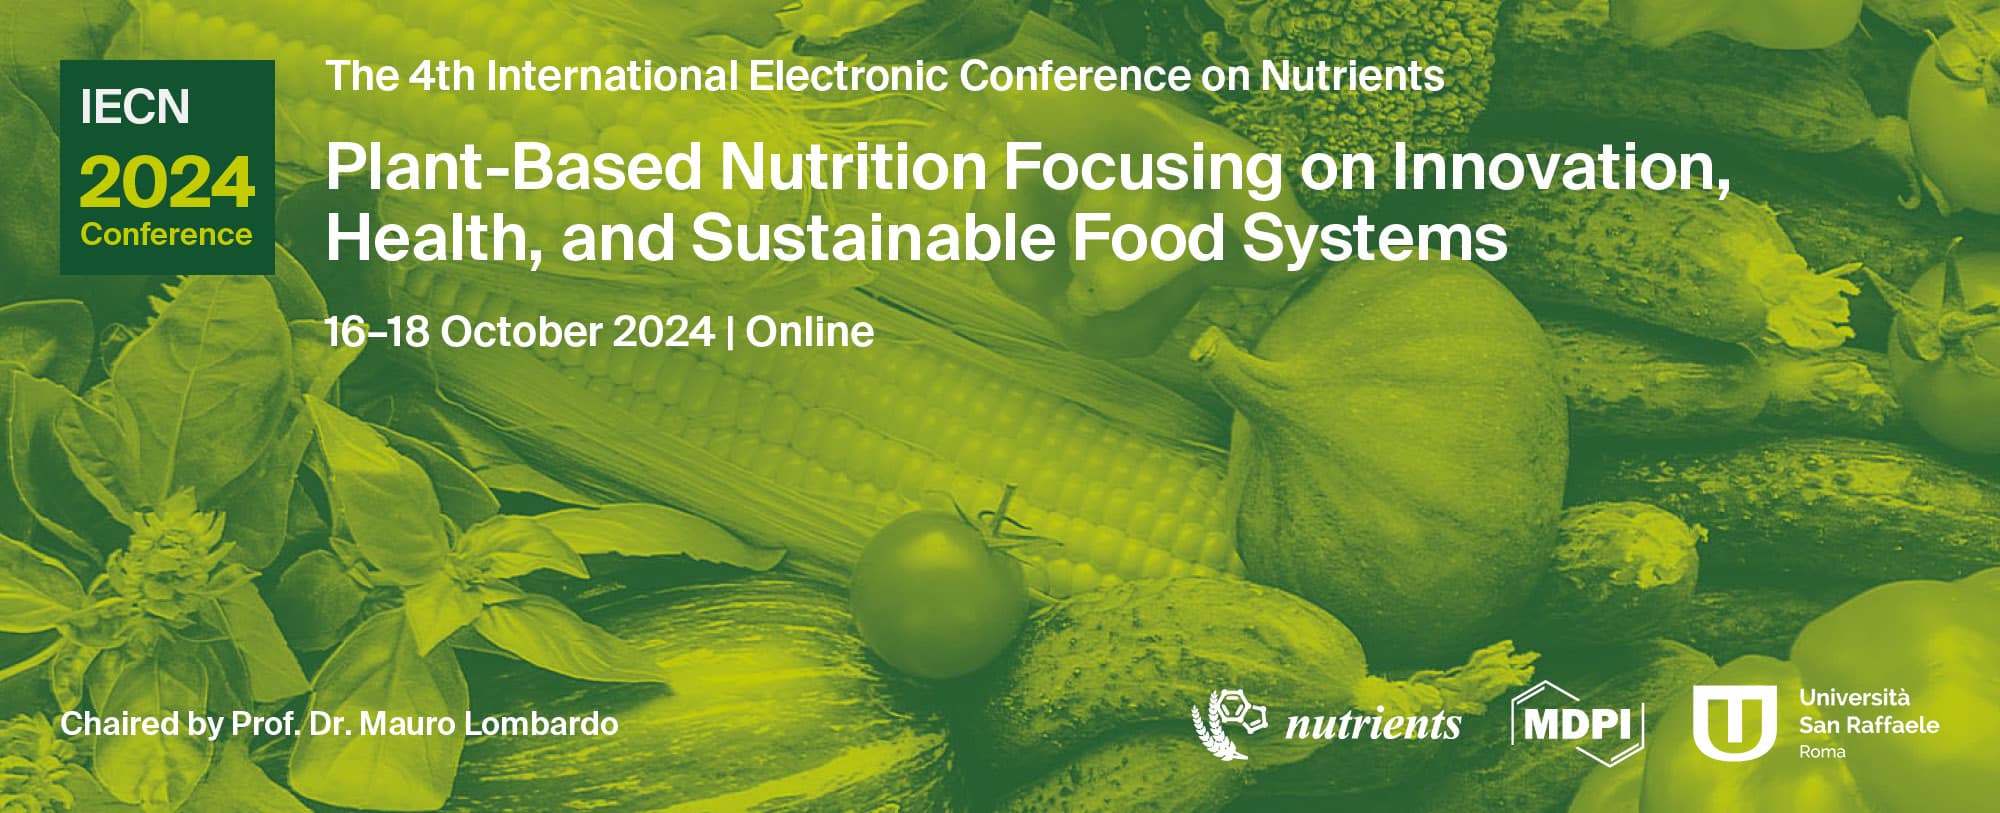 The 4th International Electronic Conference on Nutrients – Plant-Based Nutrition Focusing on Innovation, Health, and Sustainable Food Systems